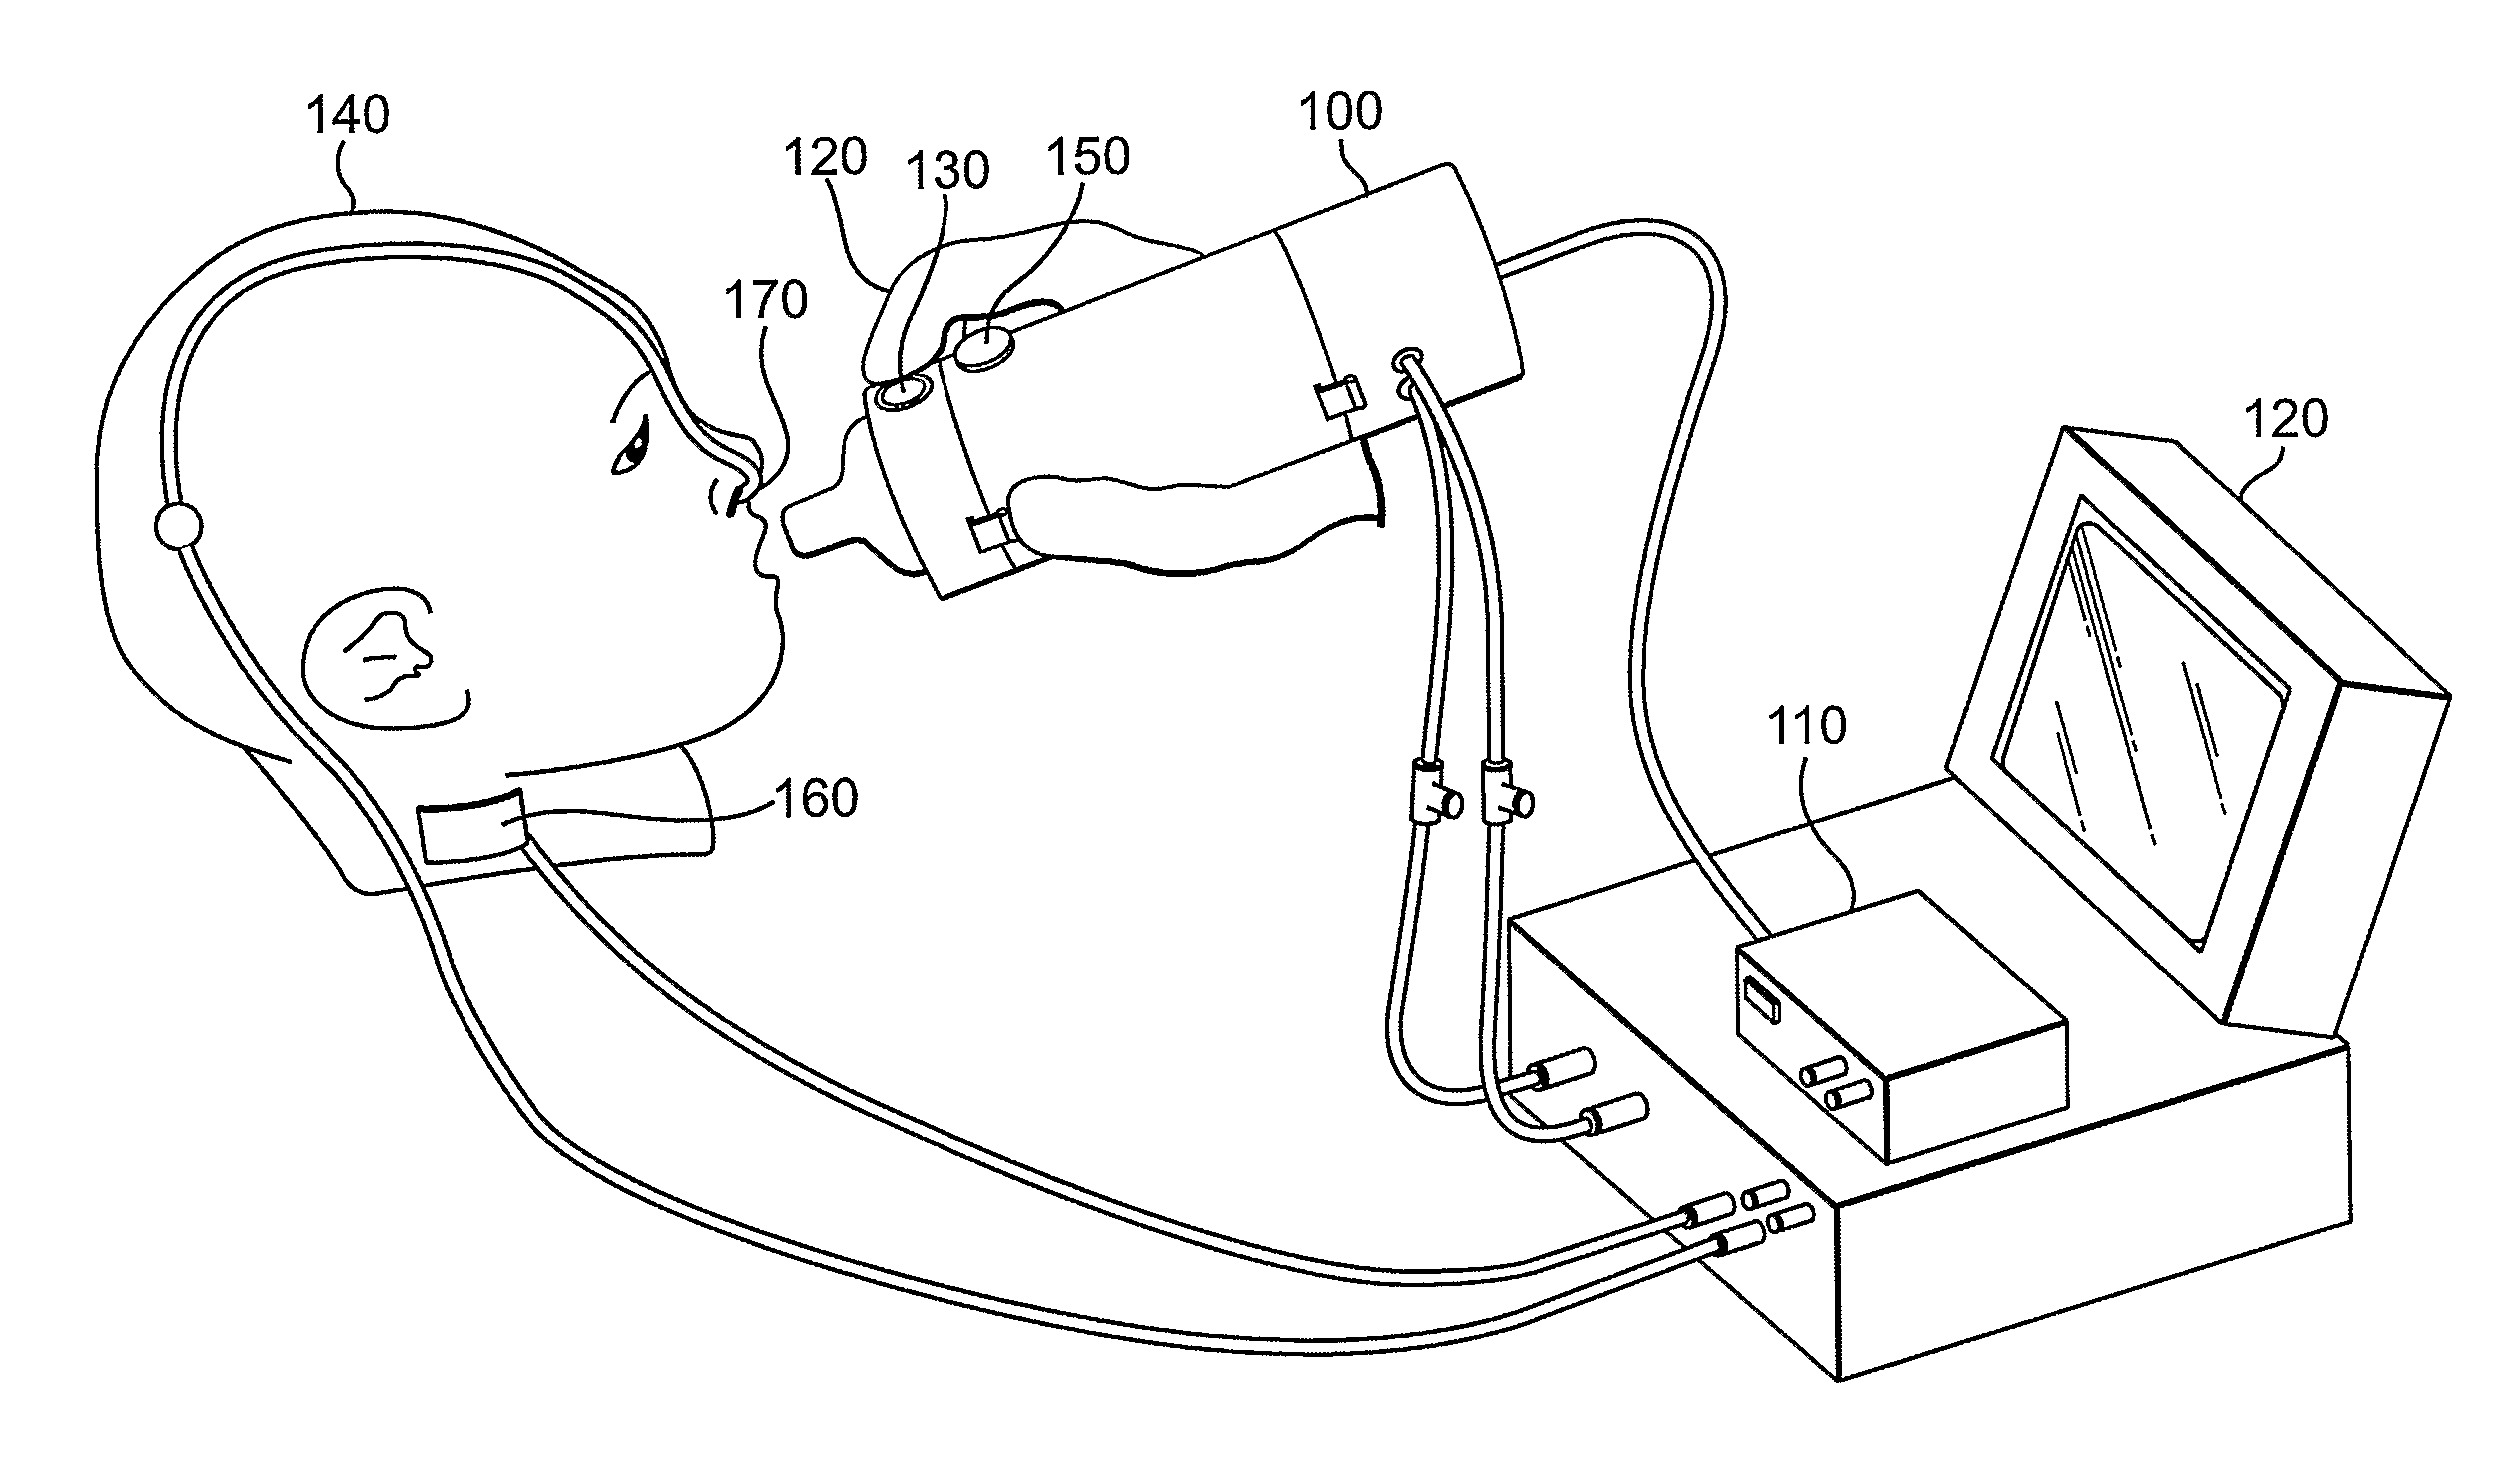 Computer Controlled Bottle for Oral Feeding of a Patient